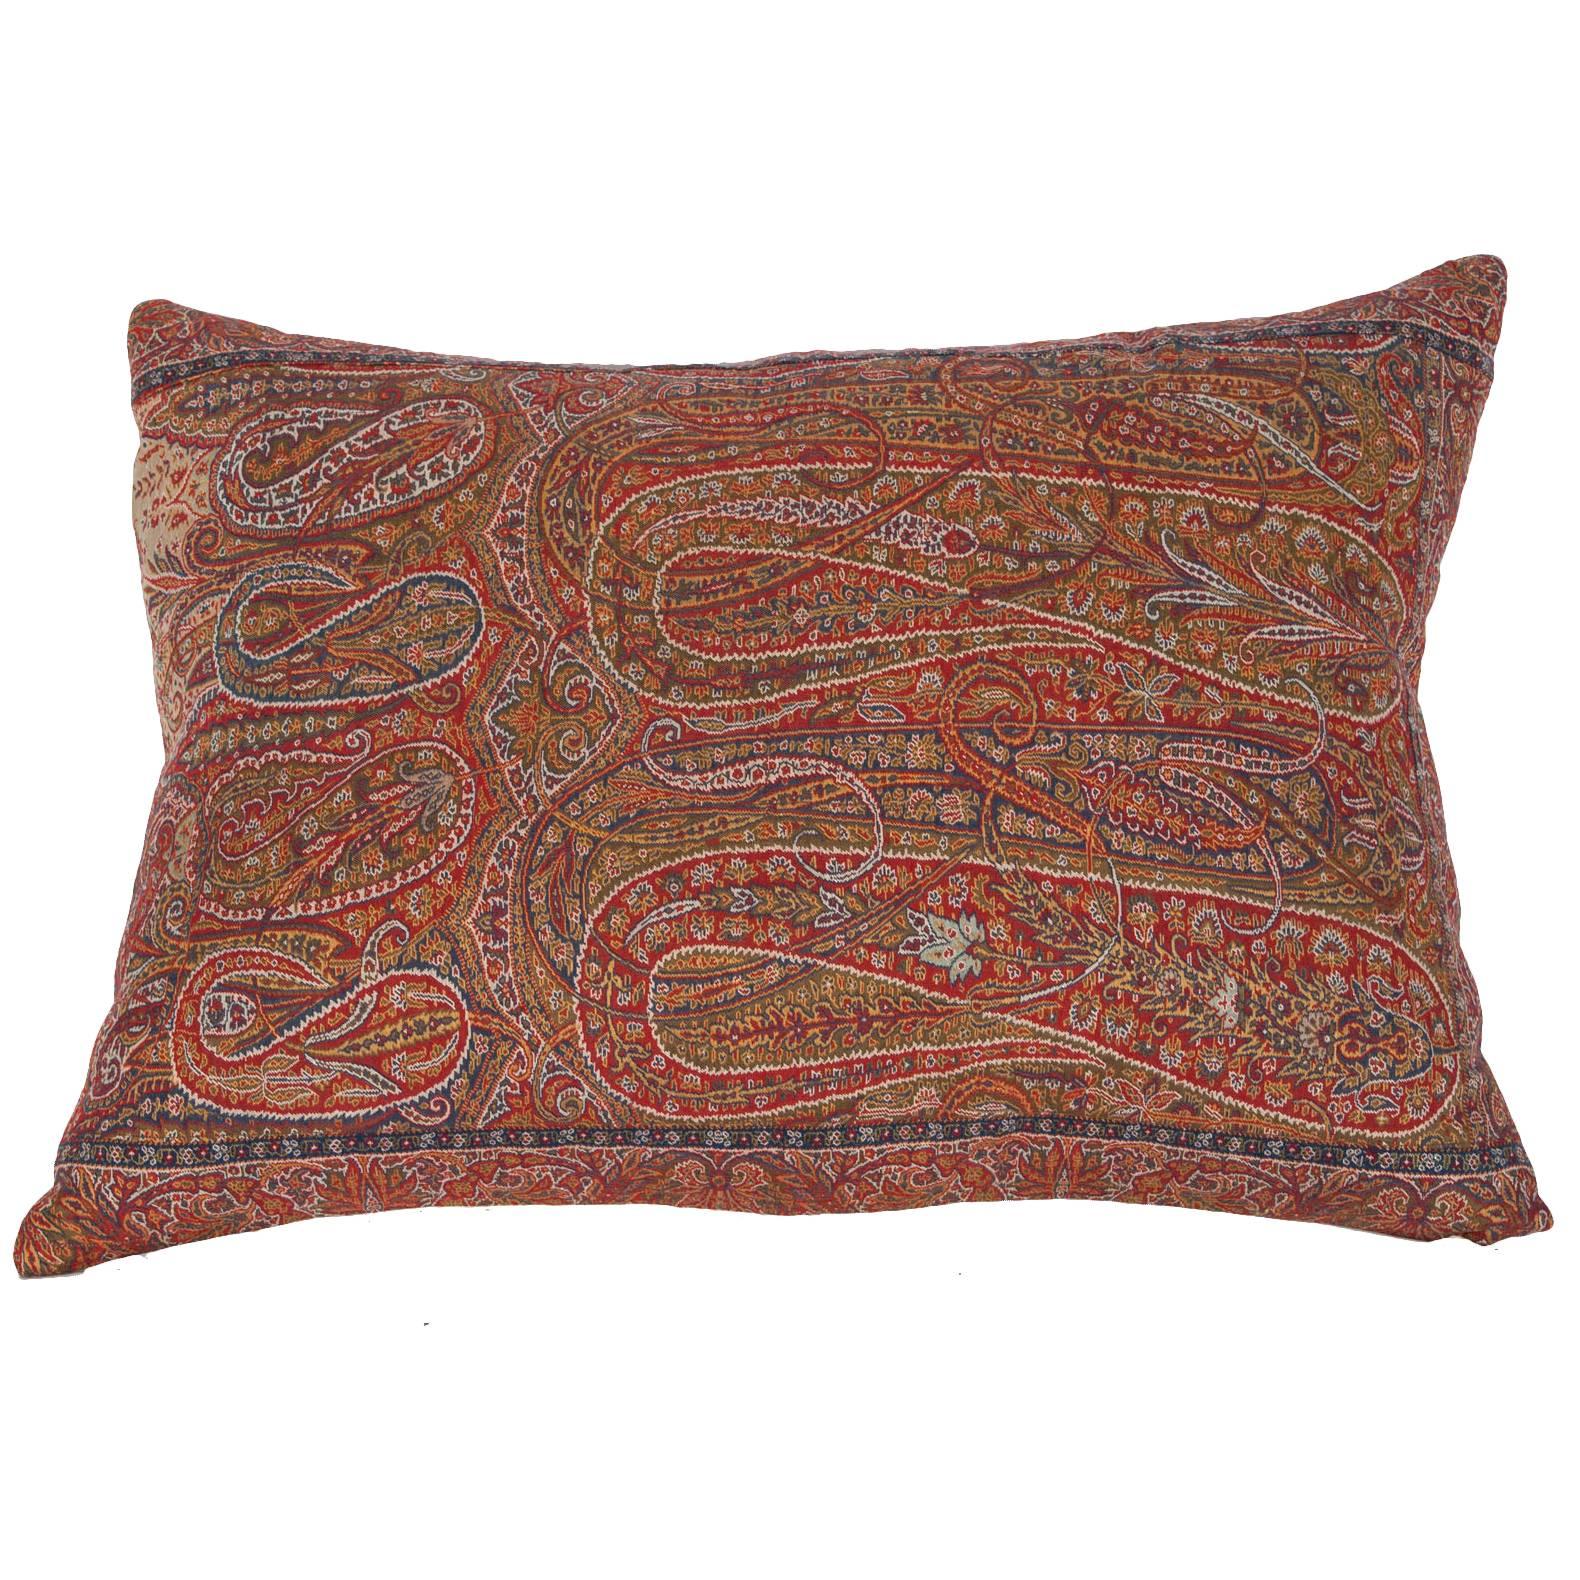 Early 19th Century Paisley Wool Pillow